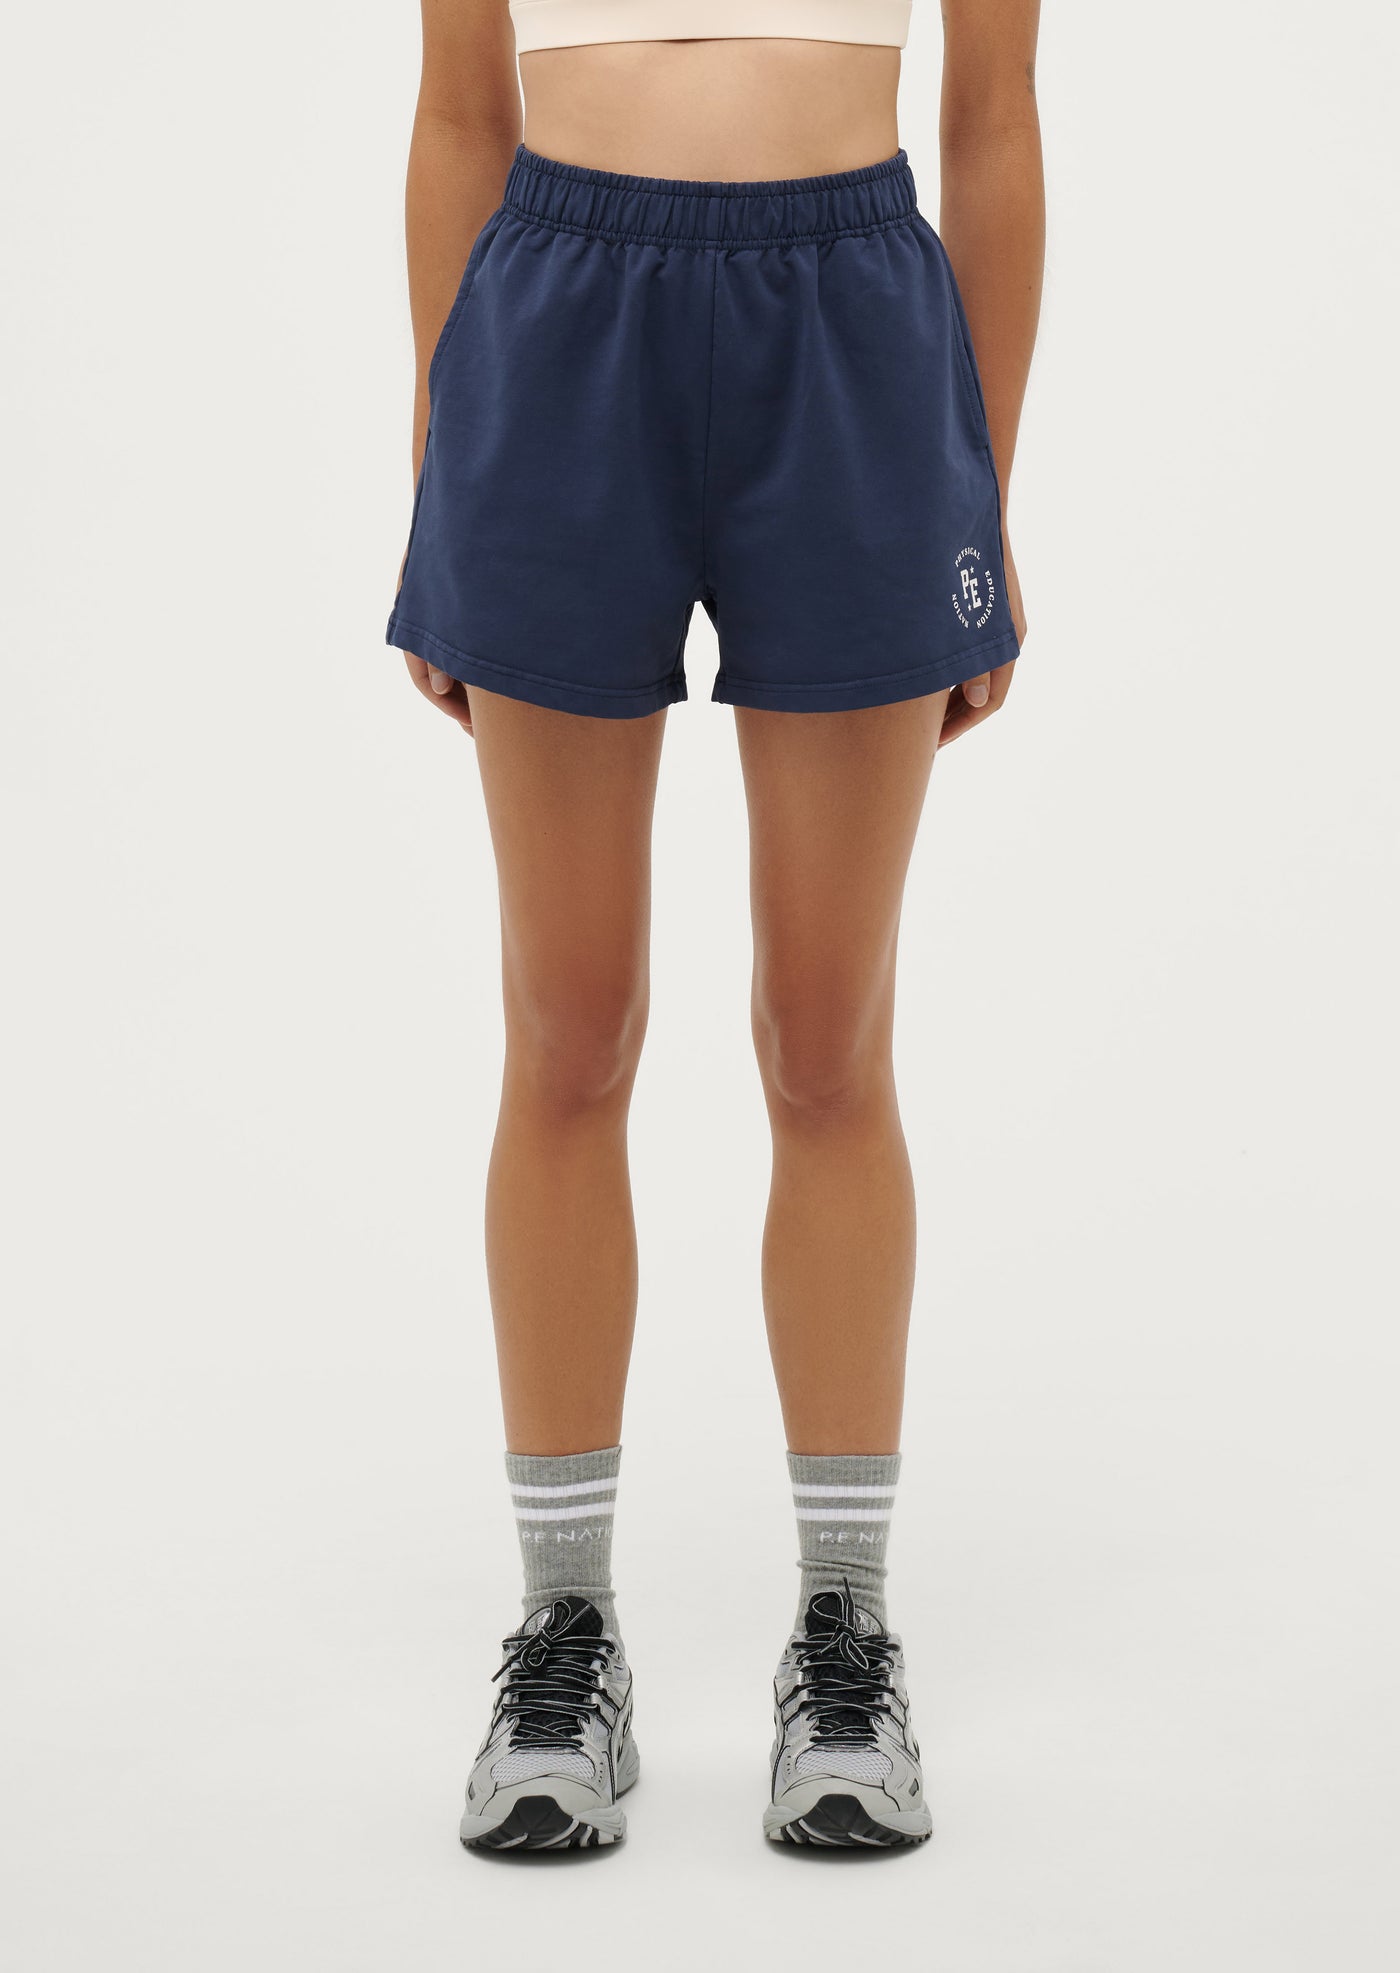 PHYSICAL SHORT IN WASHED DARK NAVY